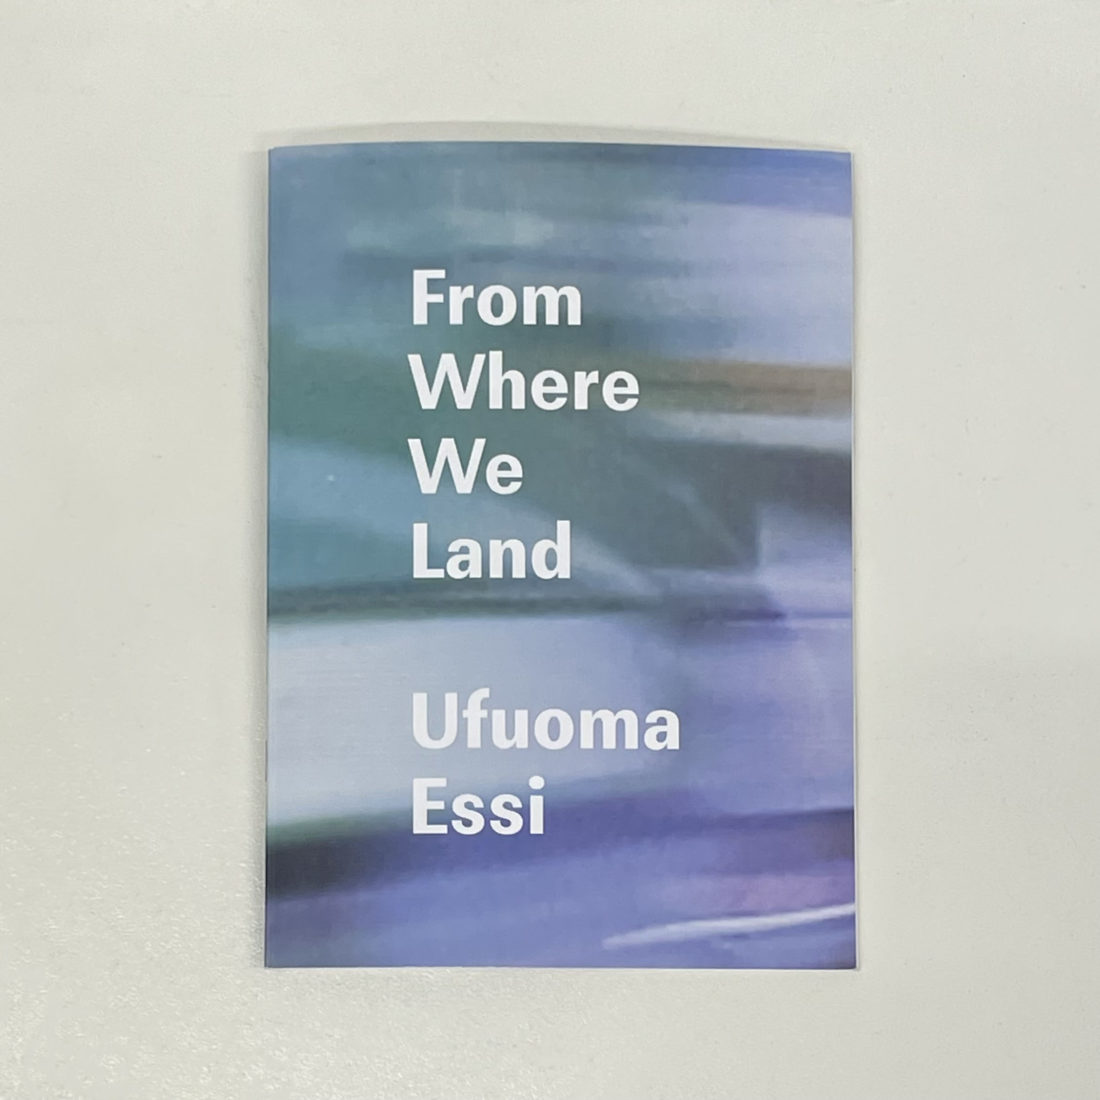 From Where We Land – Ufuoma Essi